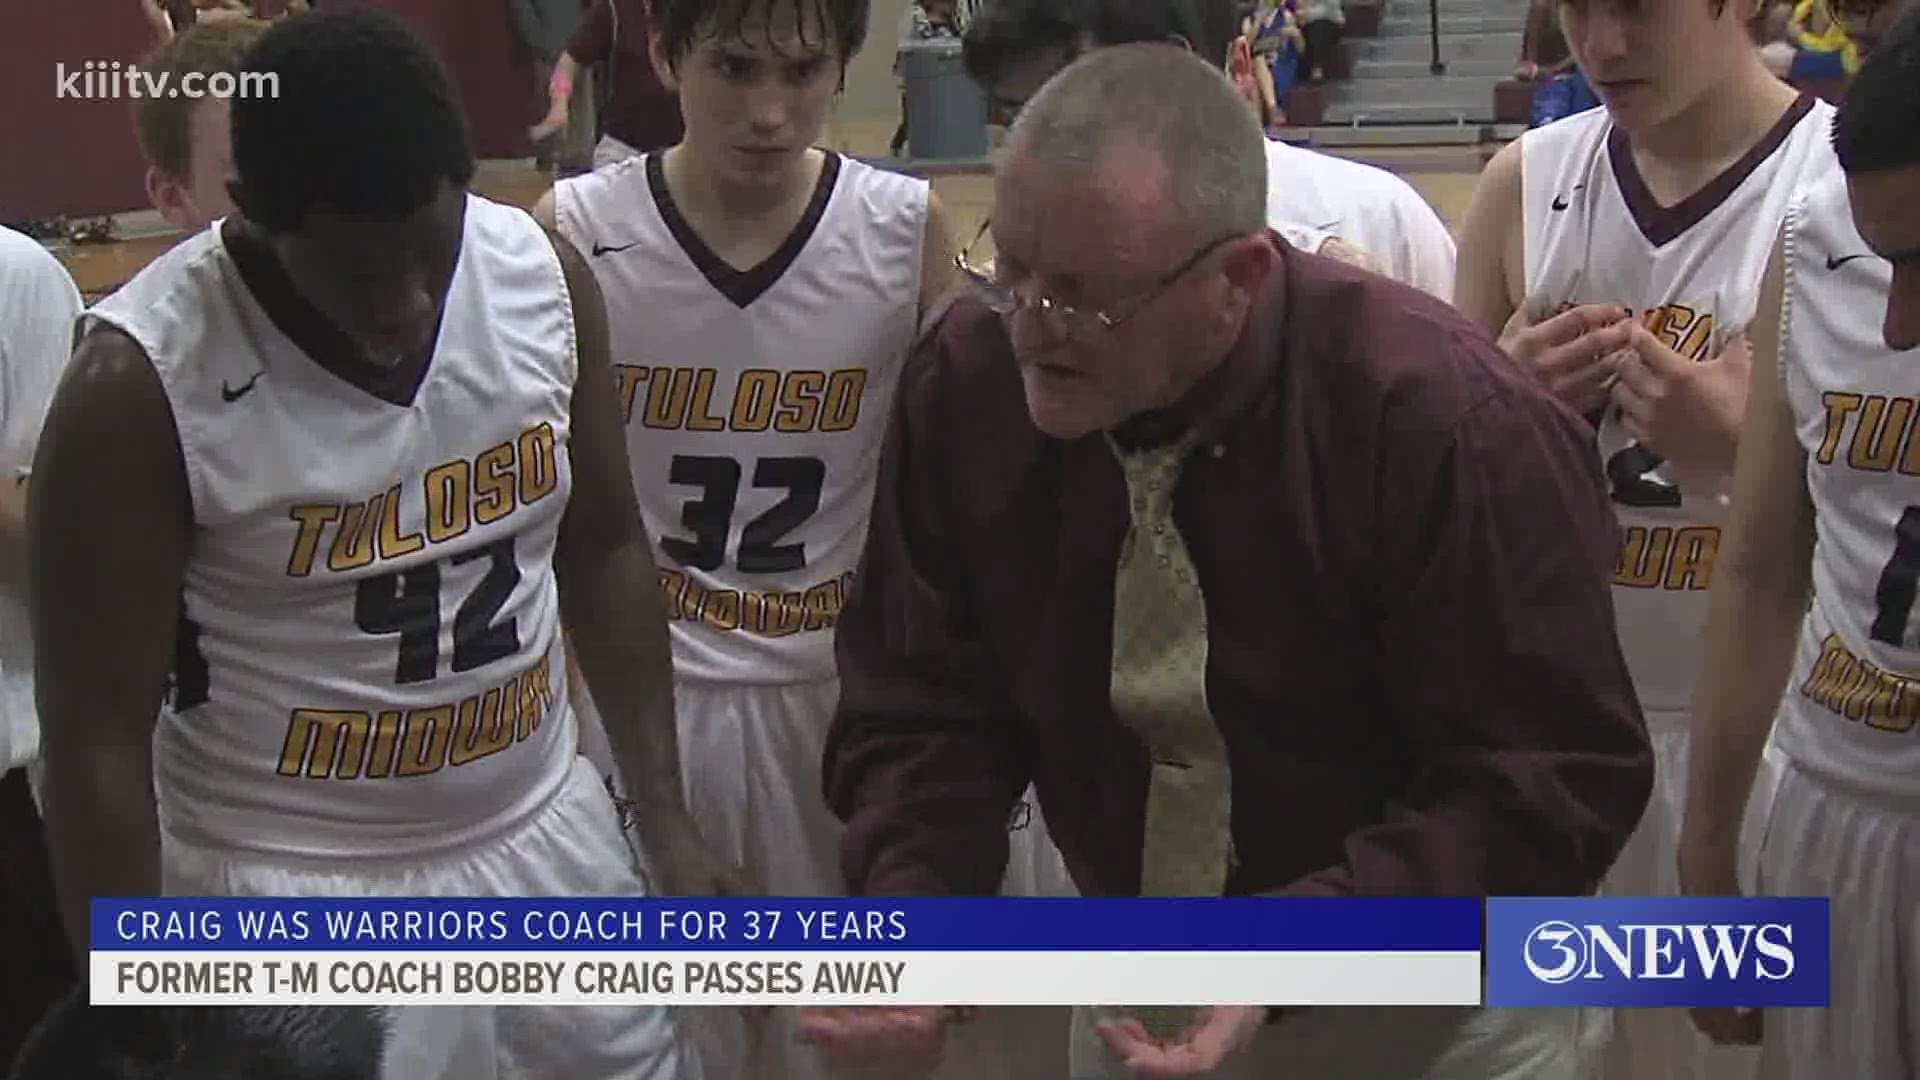 Craig was the boys basketball coach at Tuloso-Midway for 37 years.